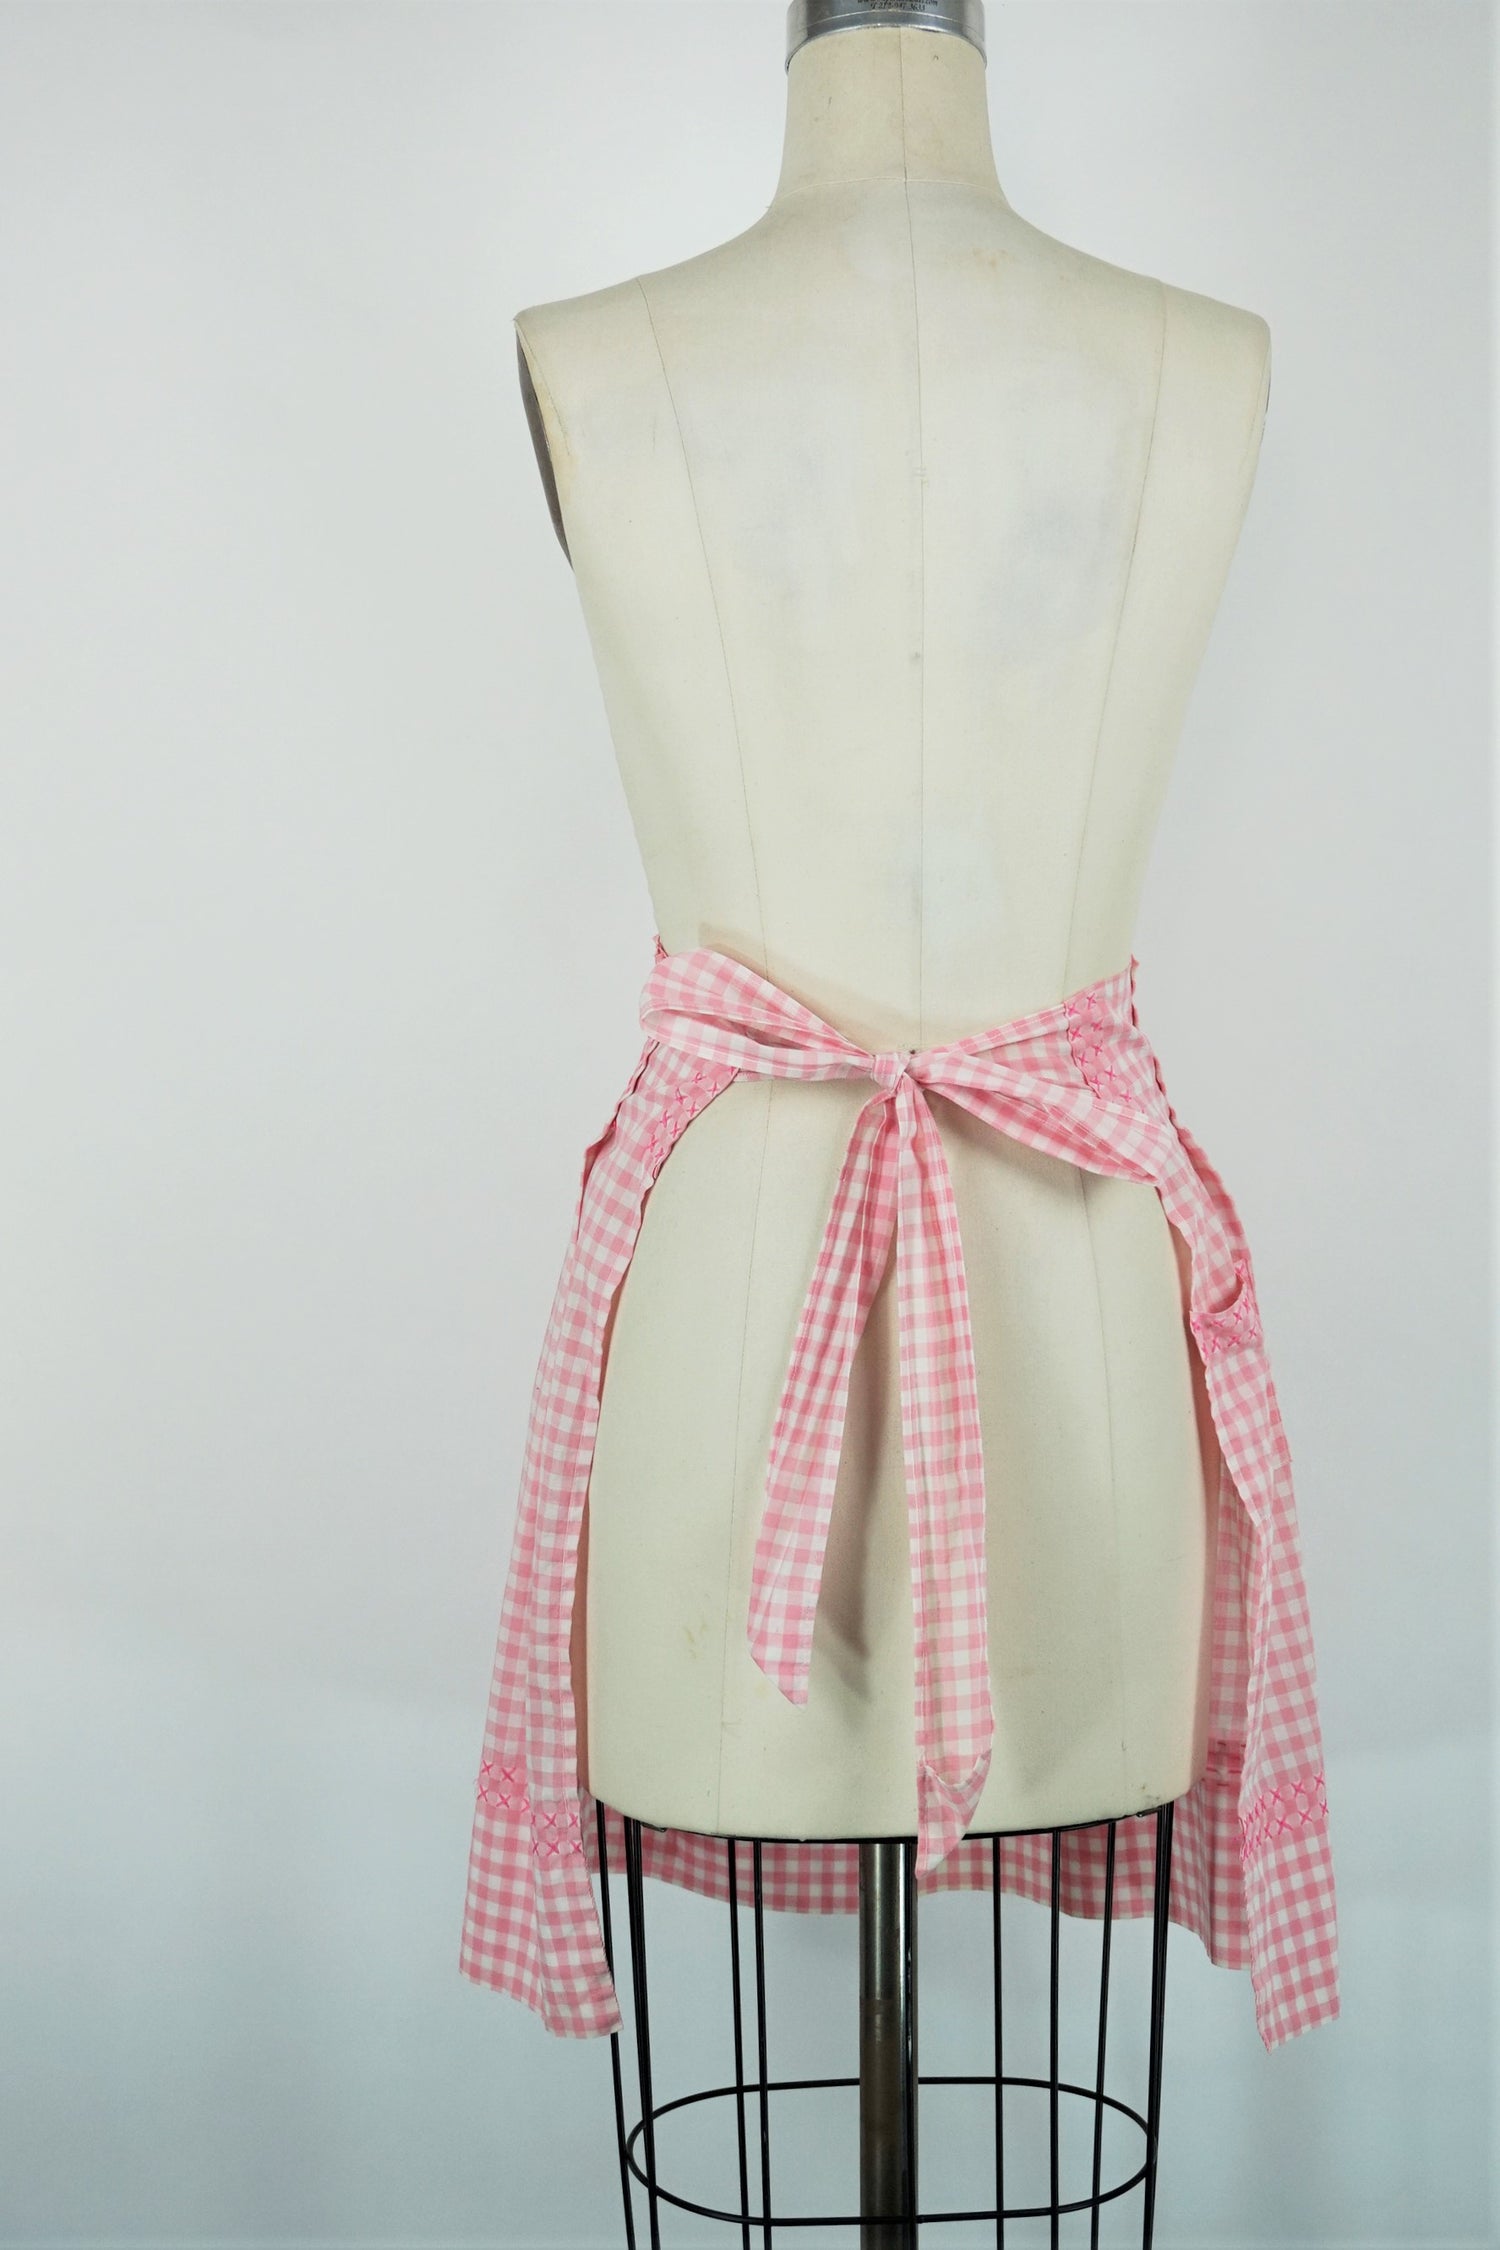 Vintage 1960s Pink And White Gingham Apron With Pocket 